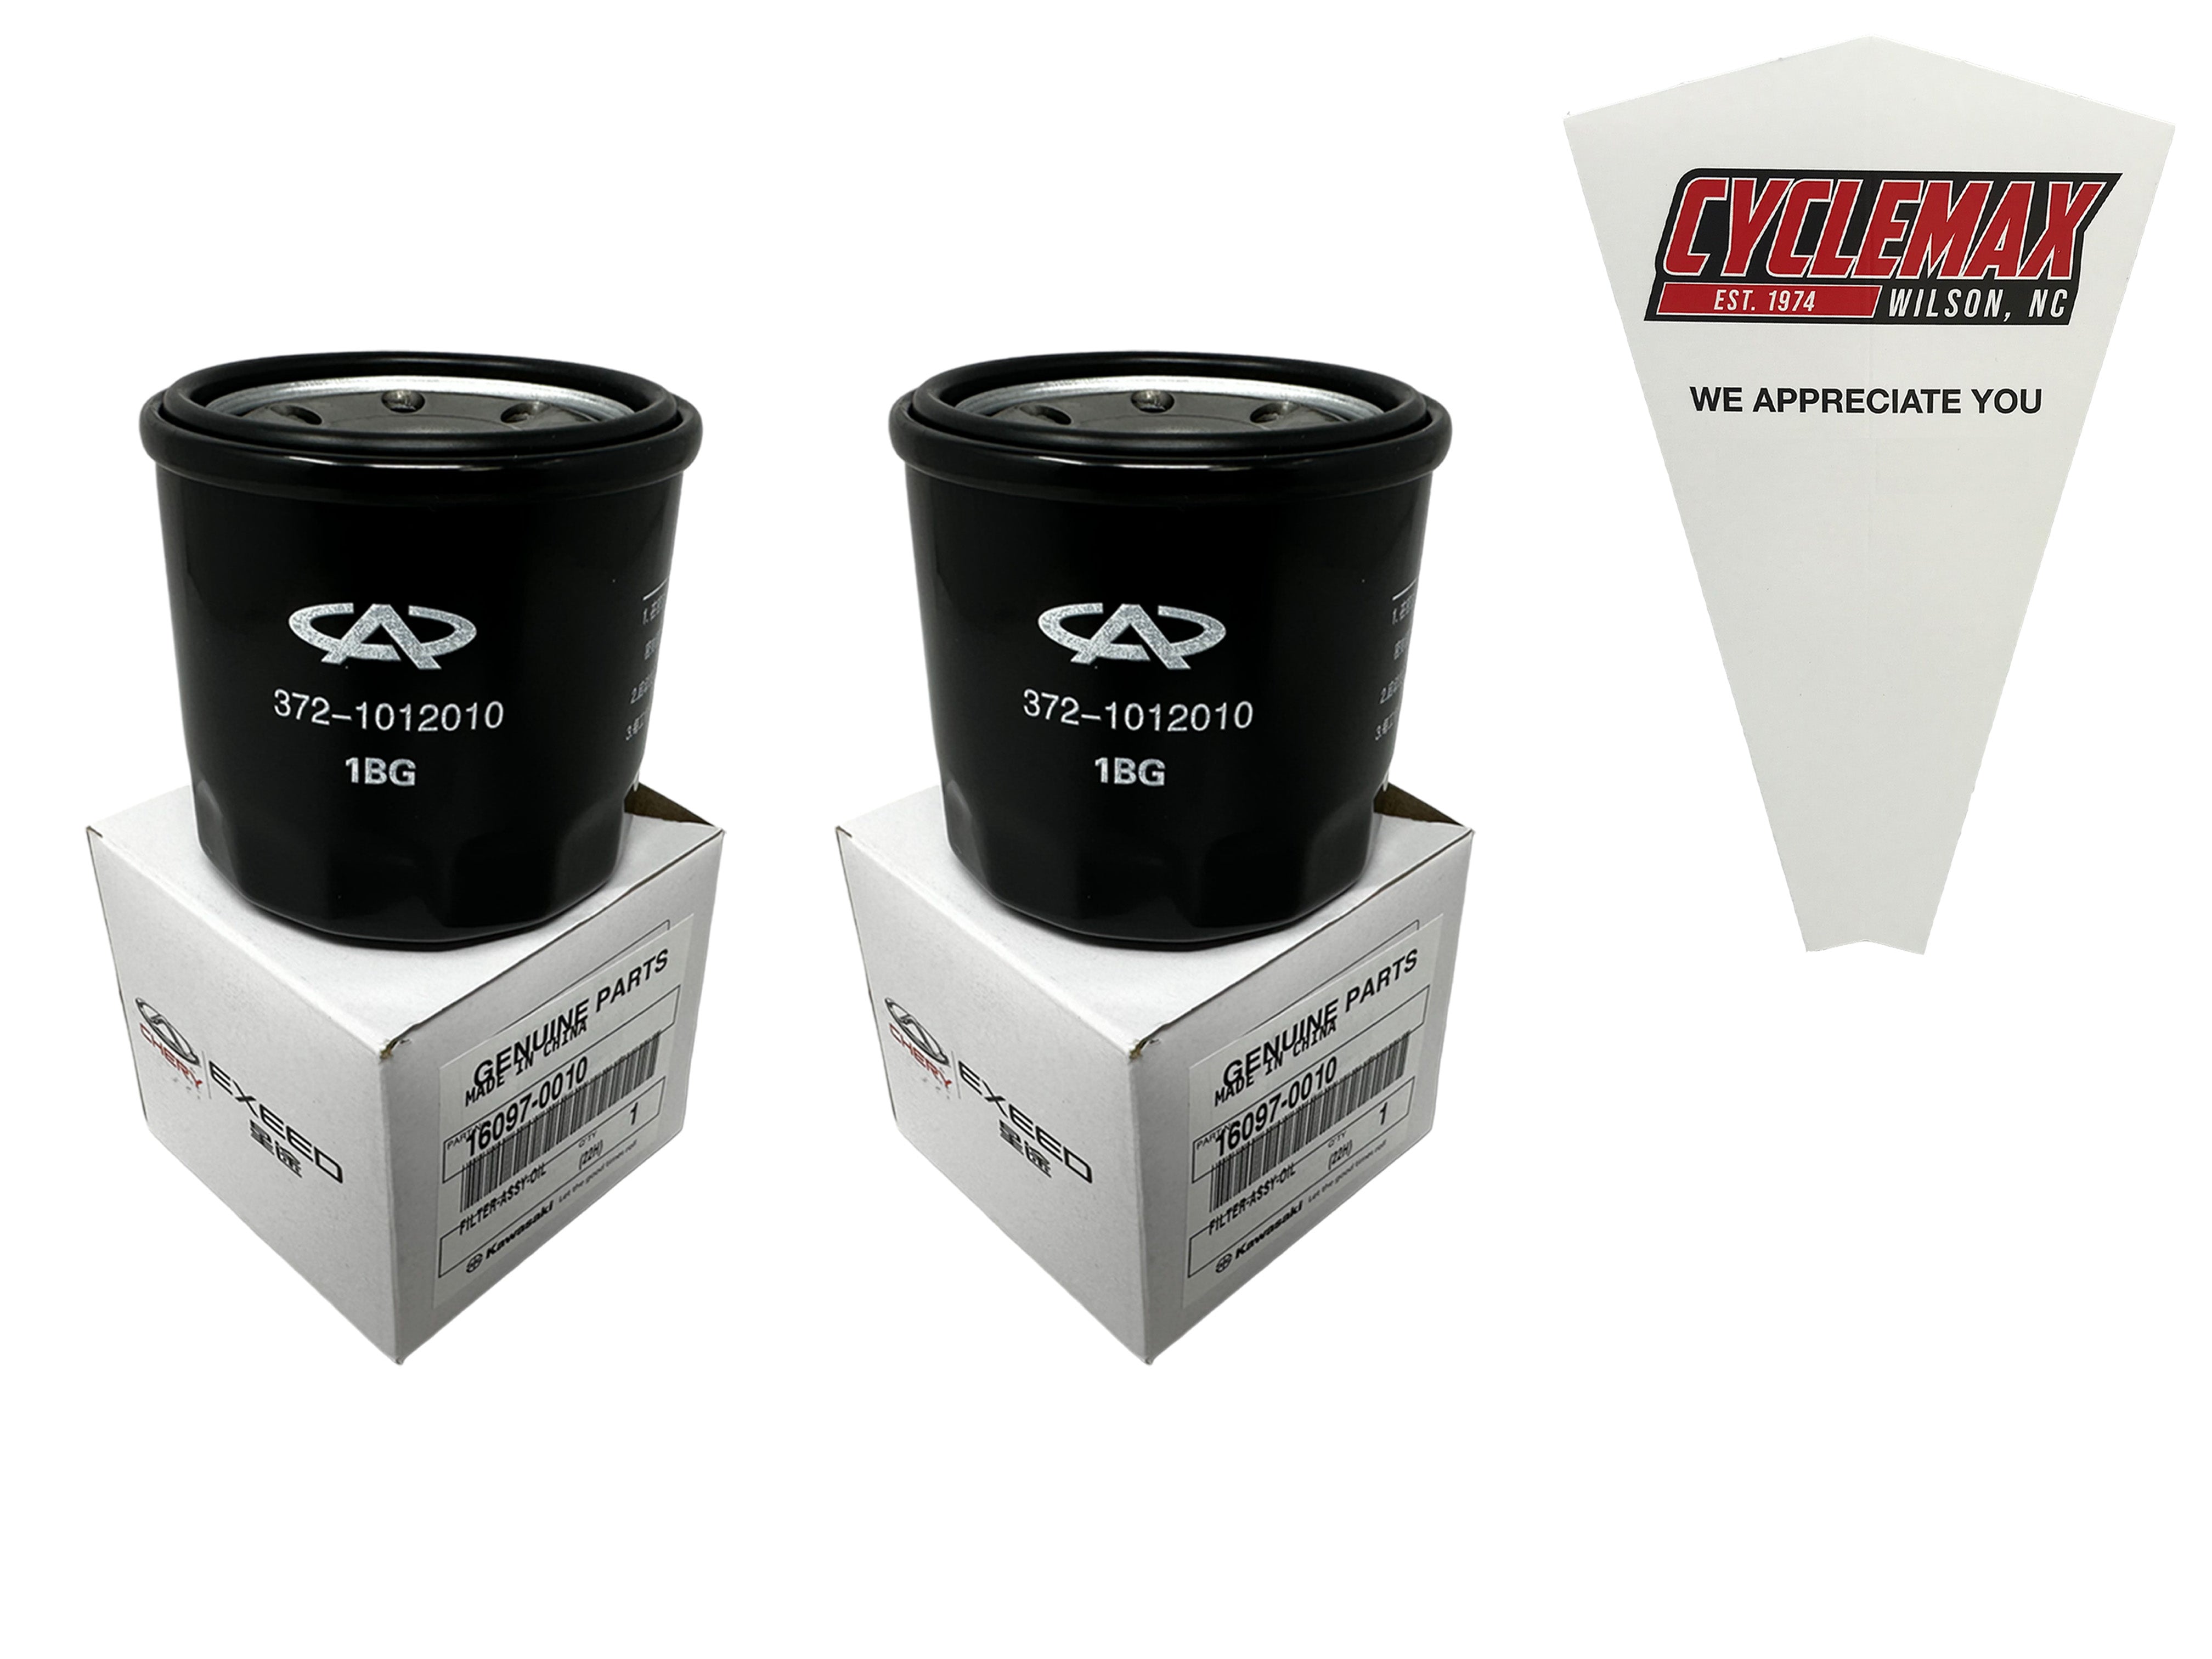 Cyclemax Two Pack for Kawasaki Oil Filter 16097-0010 Contains Two Filters and a Funnel